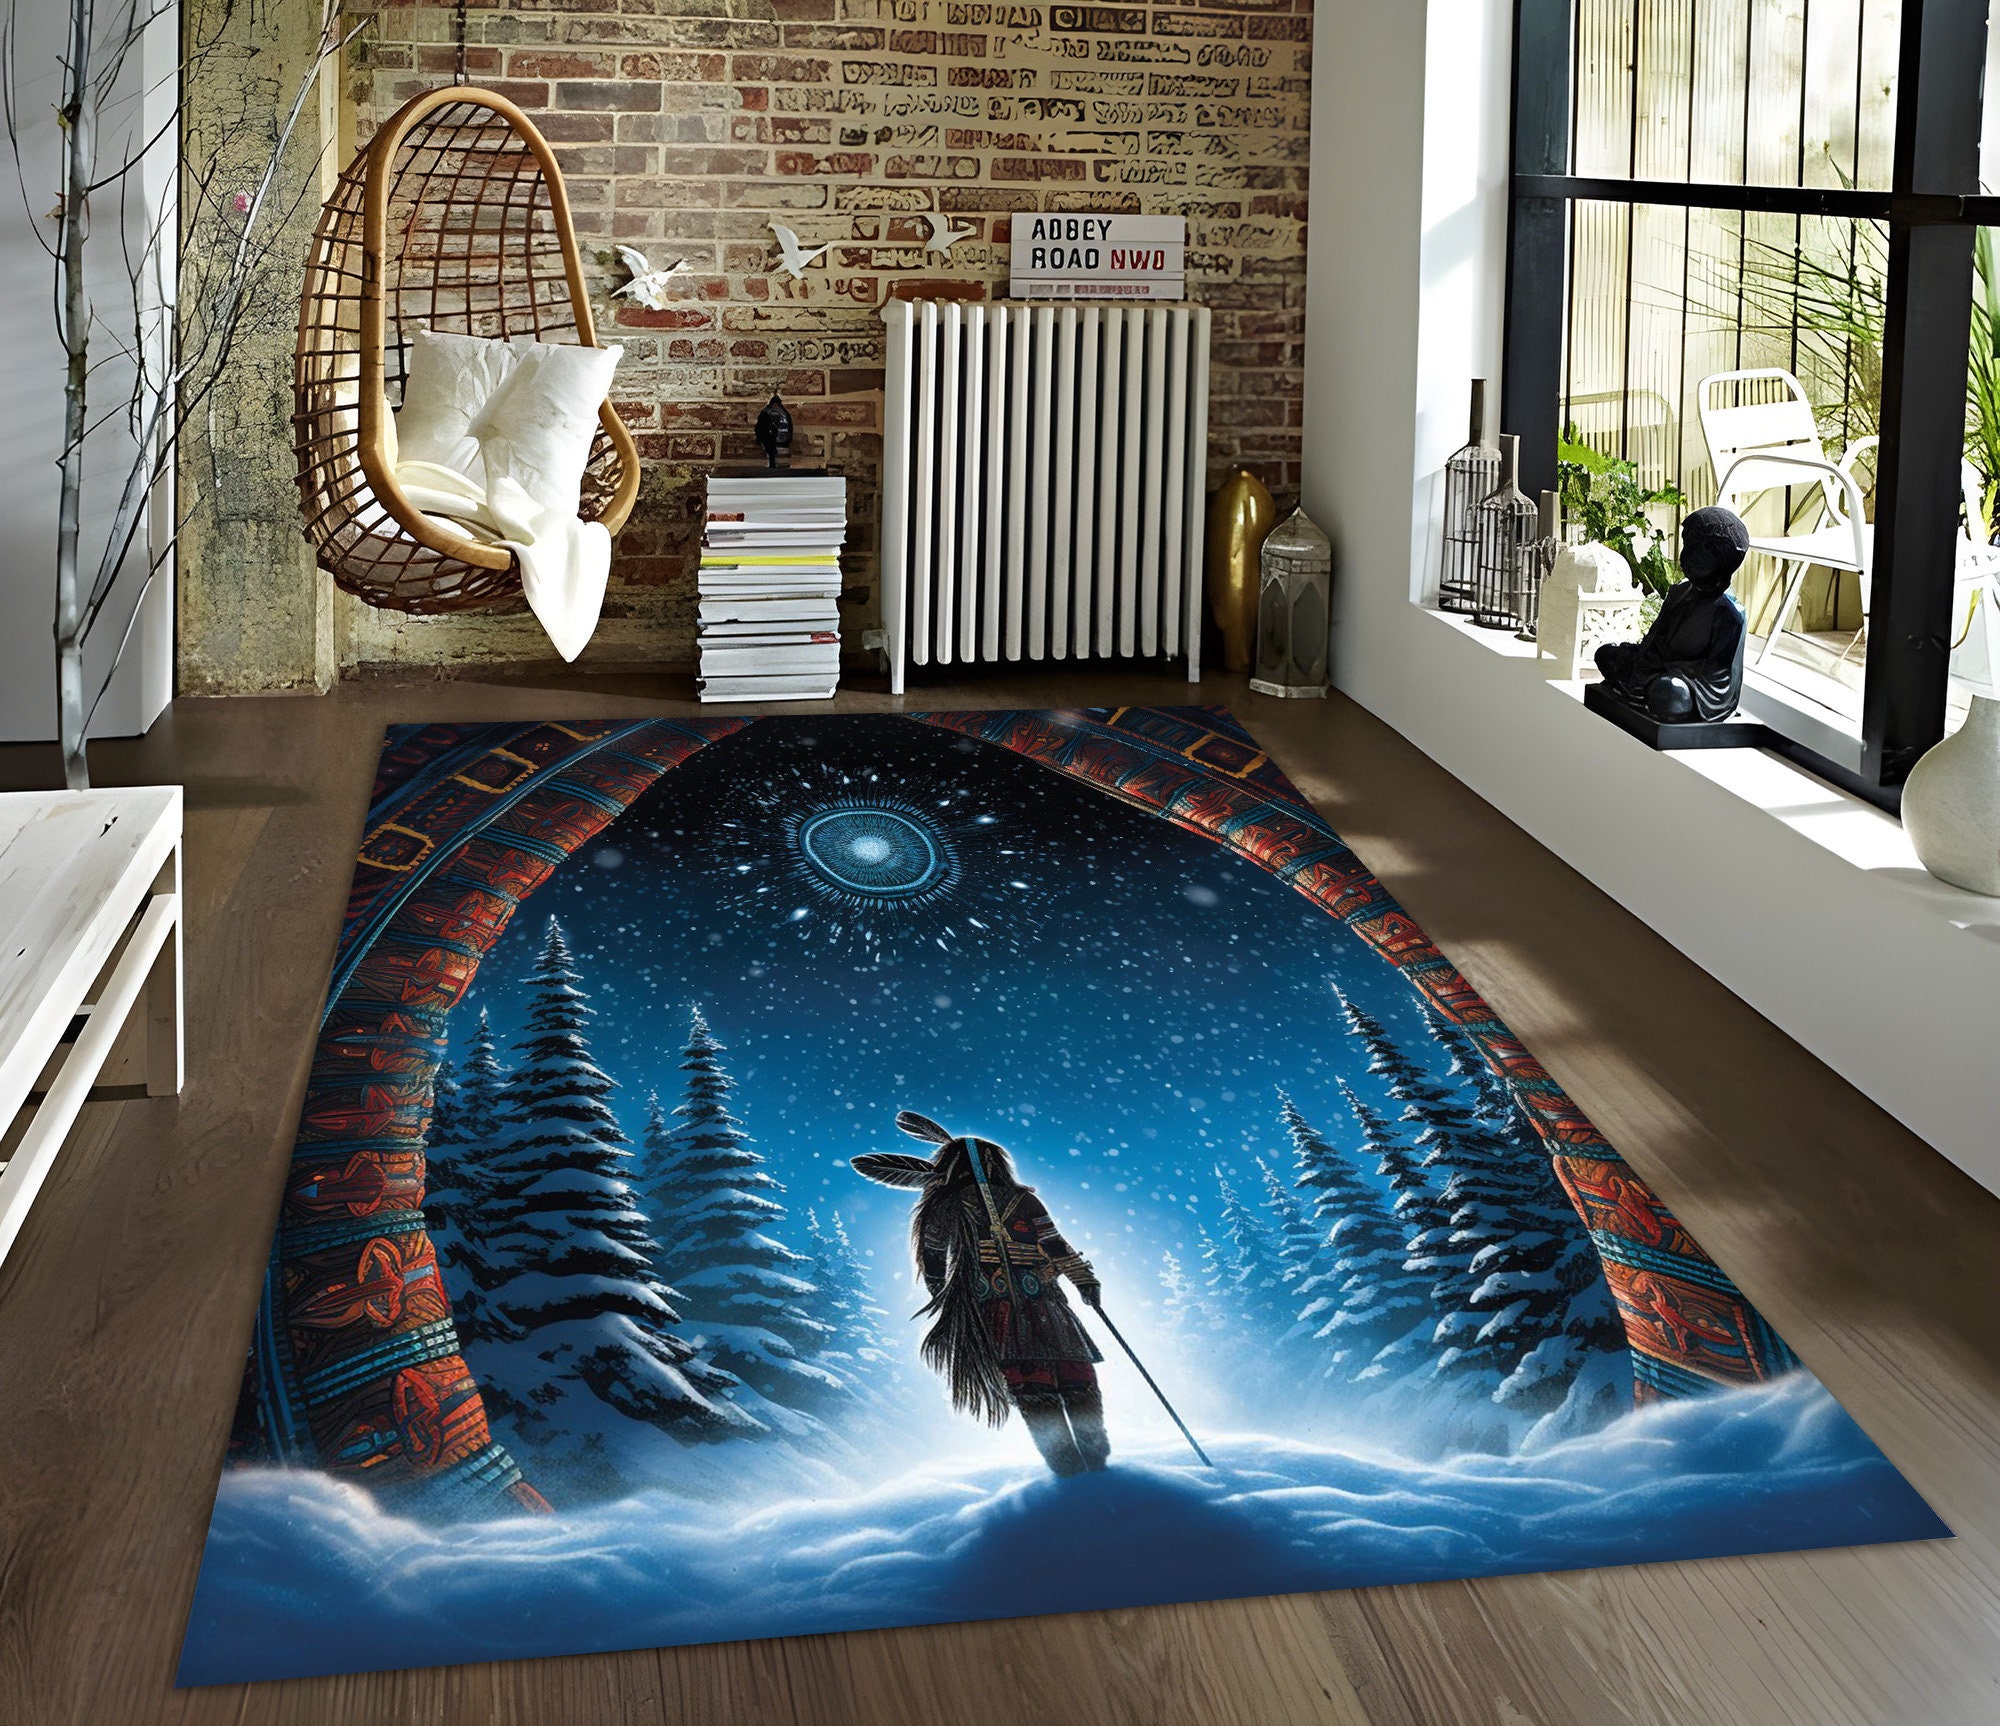 Christmas Let It Snow Winter Snowflake Area Rugs 2x3ft, Bedroom Area Runner  Rug (Non-Skid) for Hallyways, Carpets Living Room Indoor Outdoor Nursery